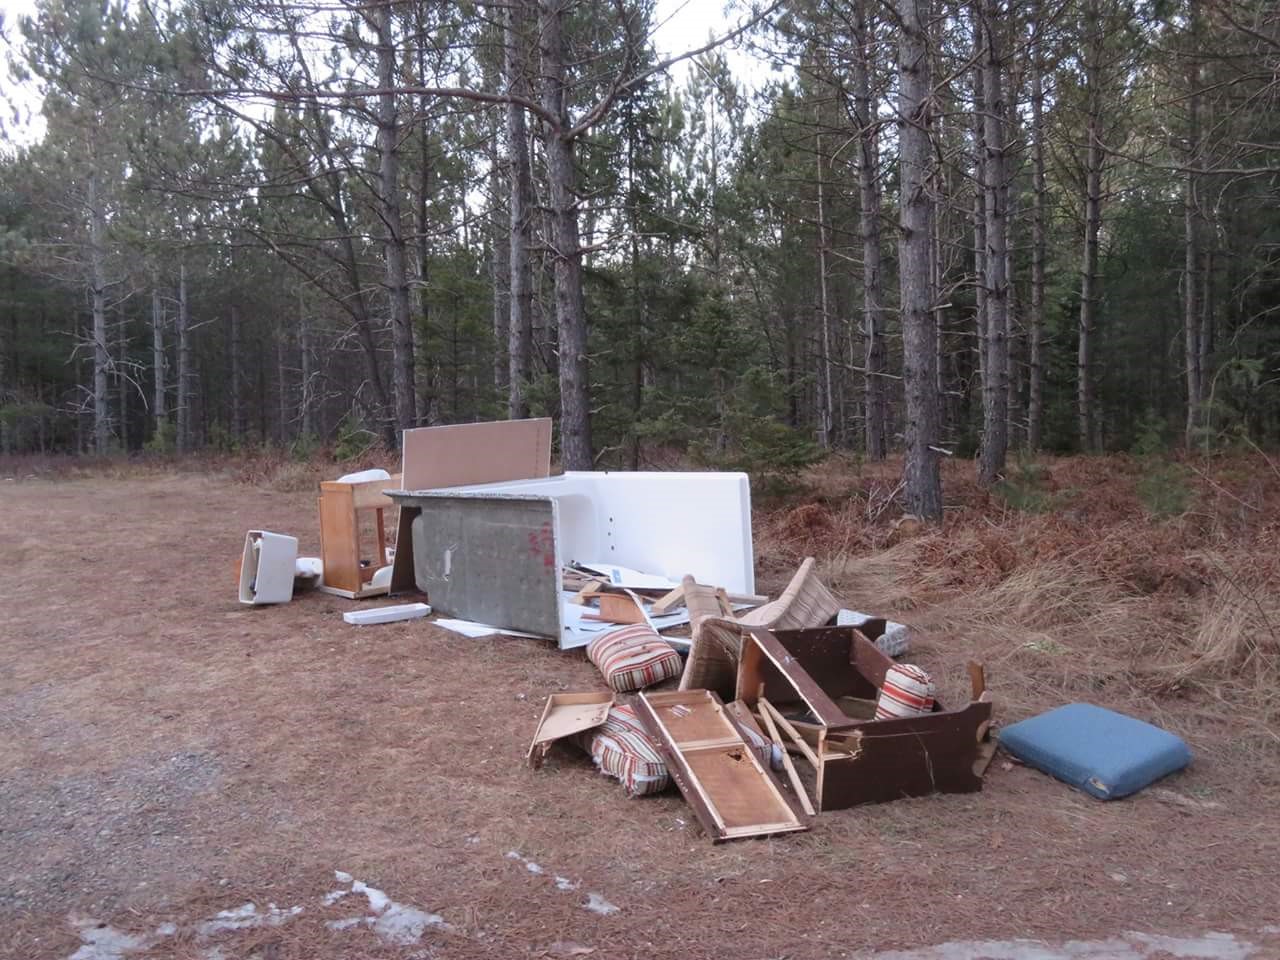 Illegal Dumping Increases On National Forest Land